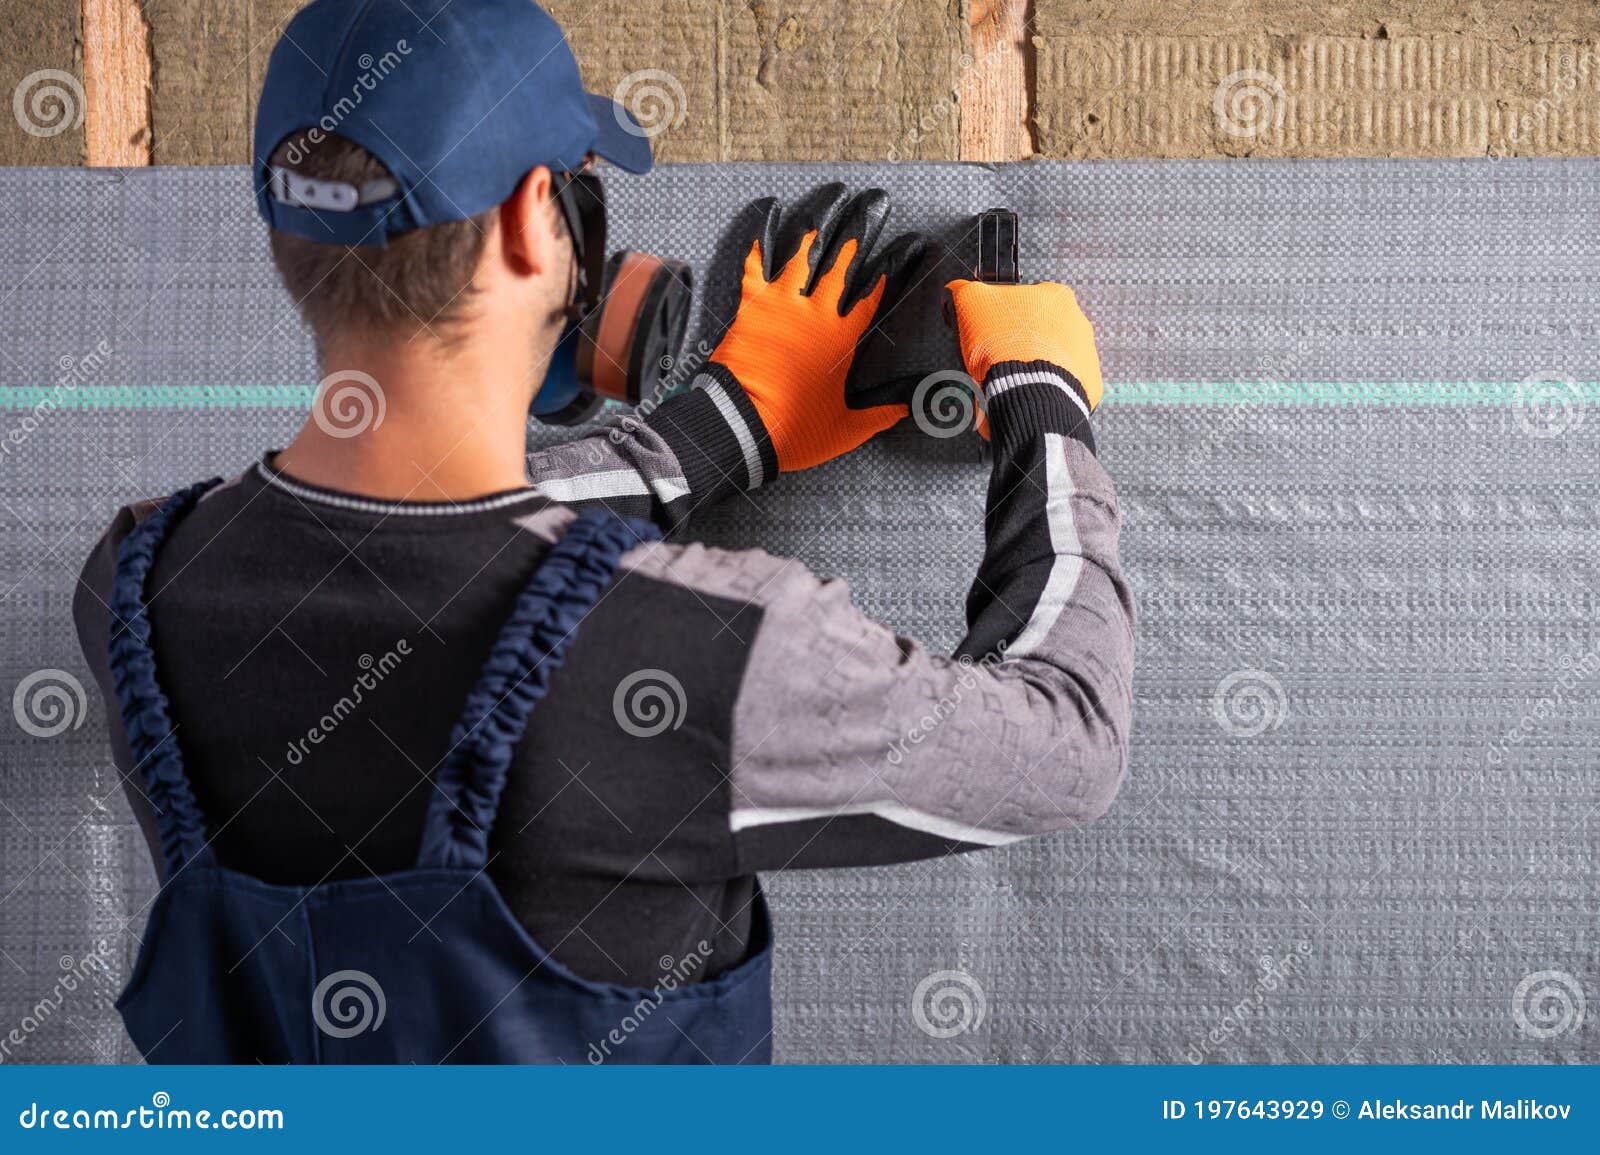 a worker in overalls, using a stapler, mounts a vapor barrier membrane to protect the mineral insulation